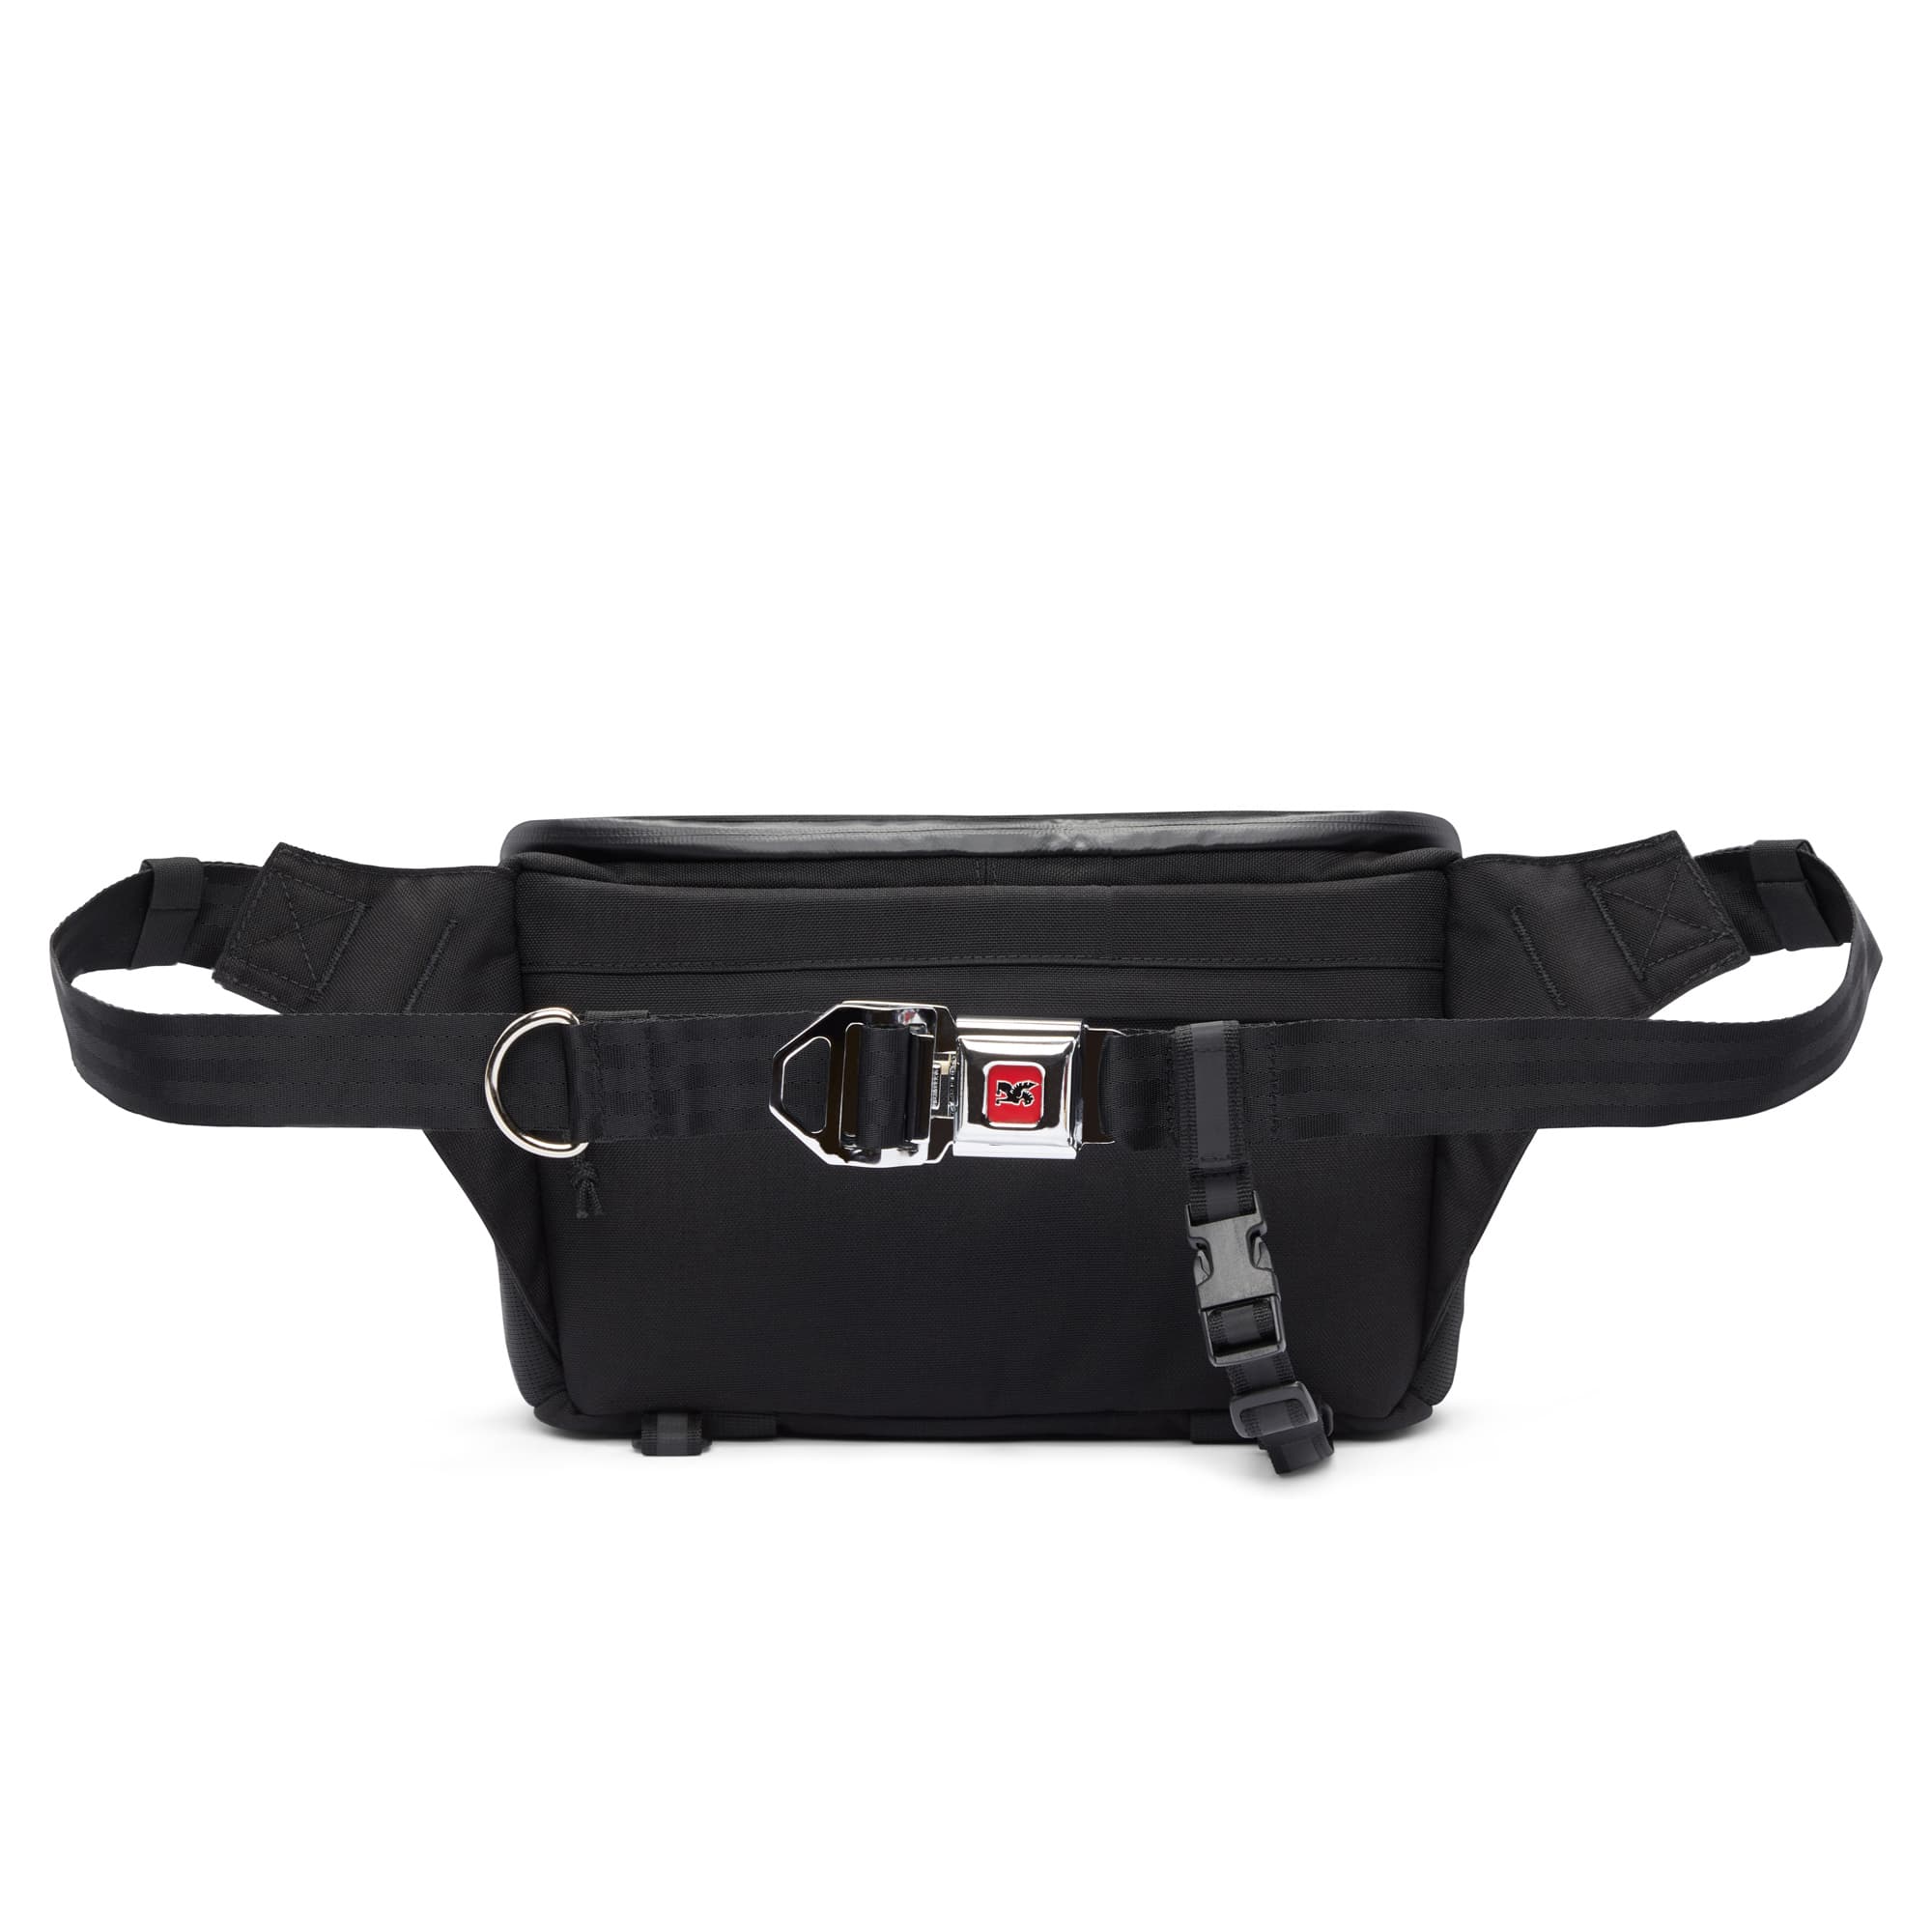 Niko tech camera sling in black back view with iconic Chrome buckle